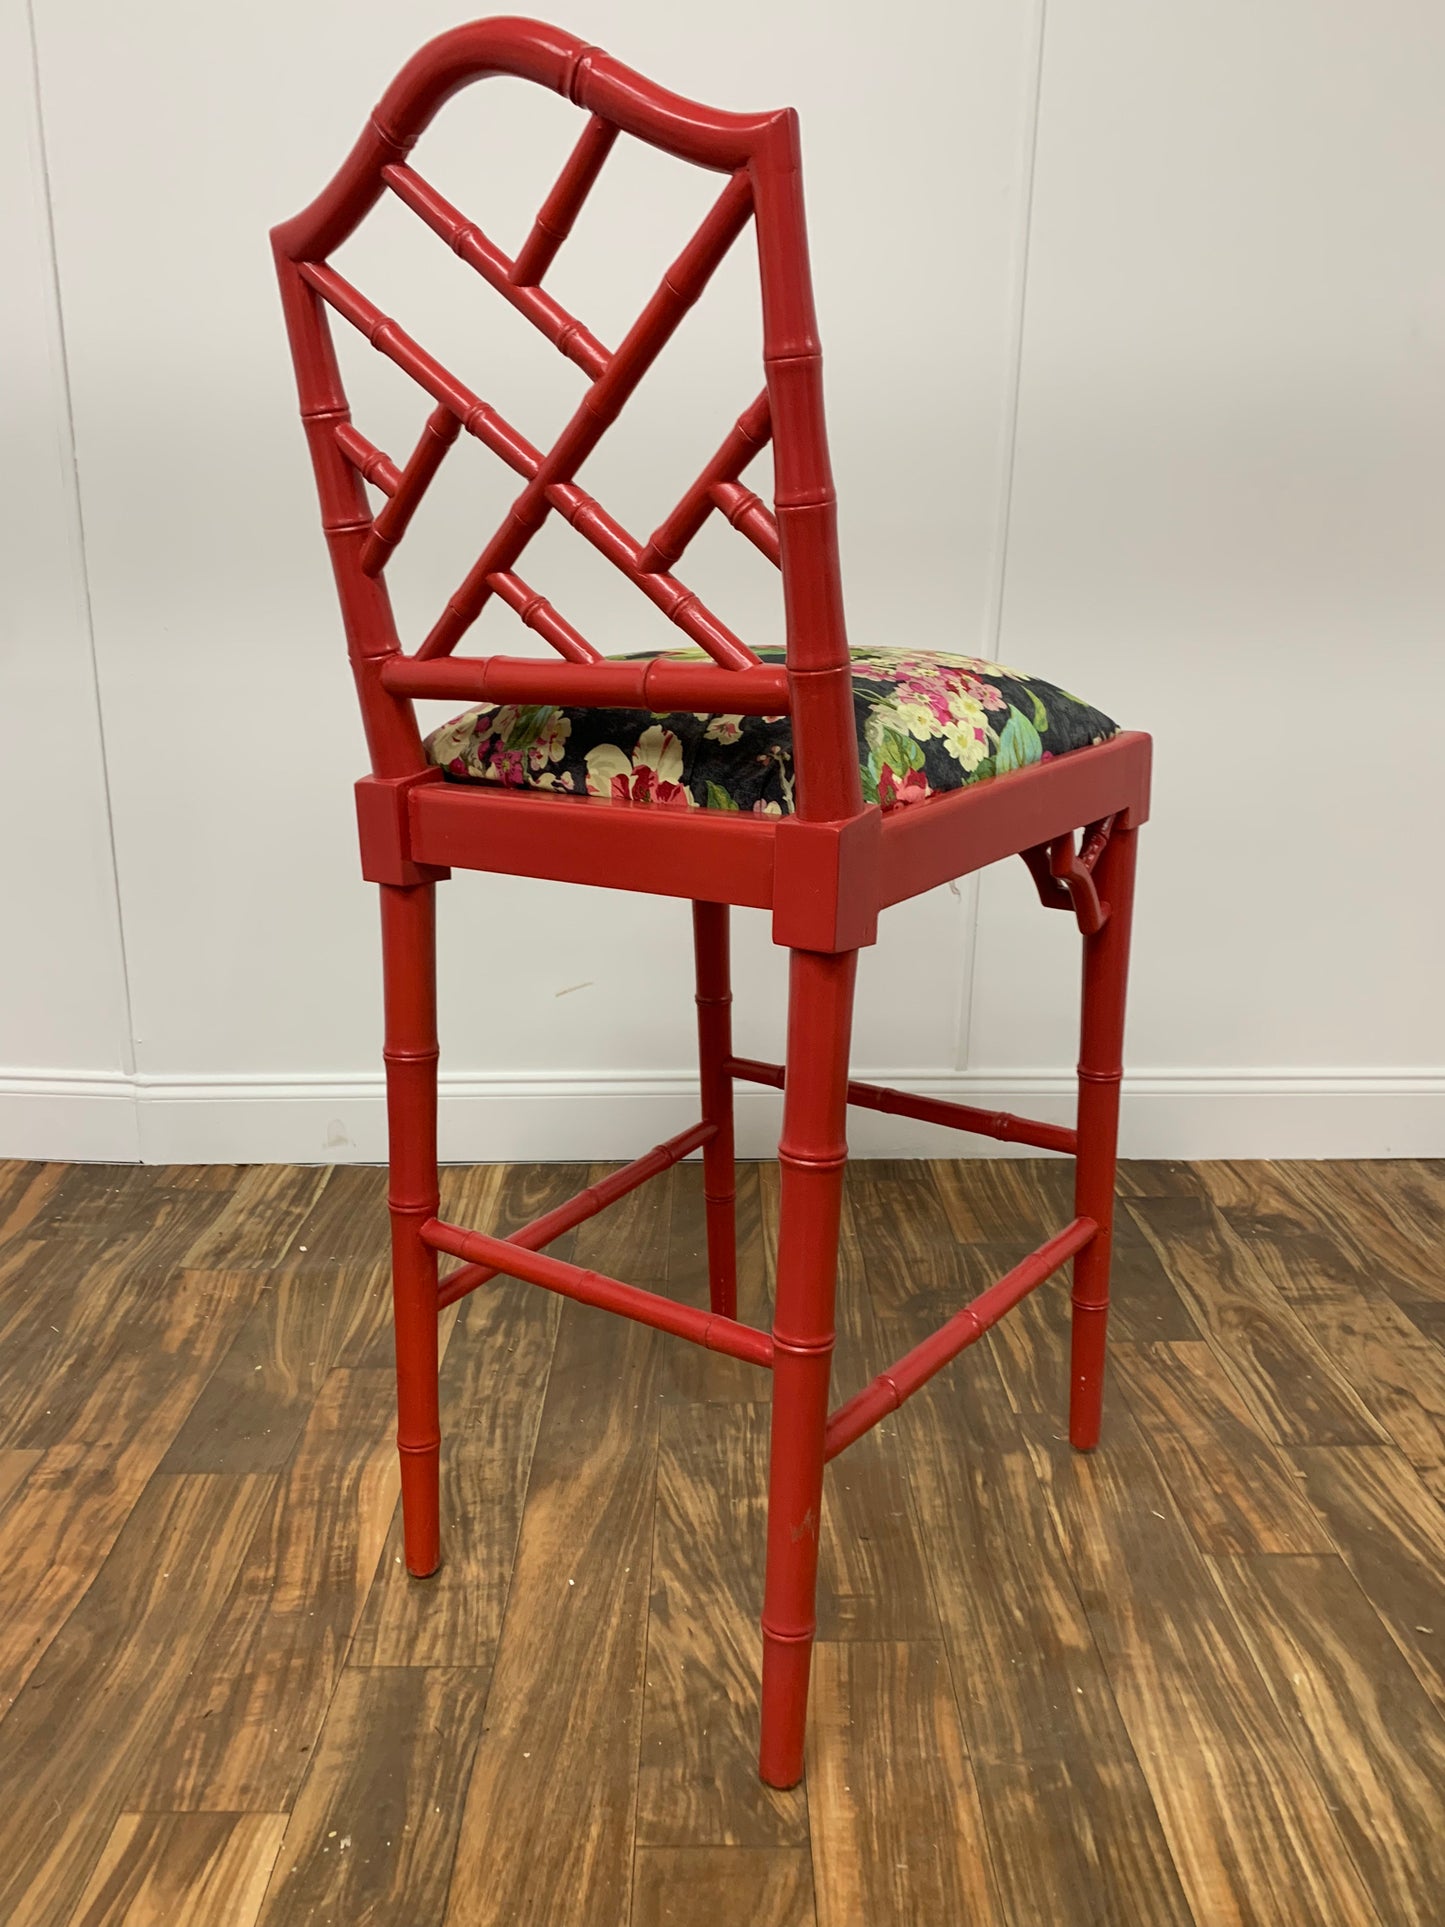 RED HIGH CHAIR BAR STOOL WITH FLORAL CUSHIONS